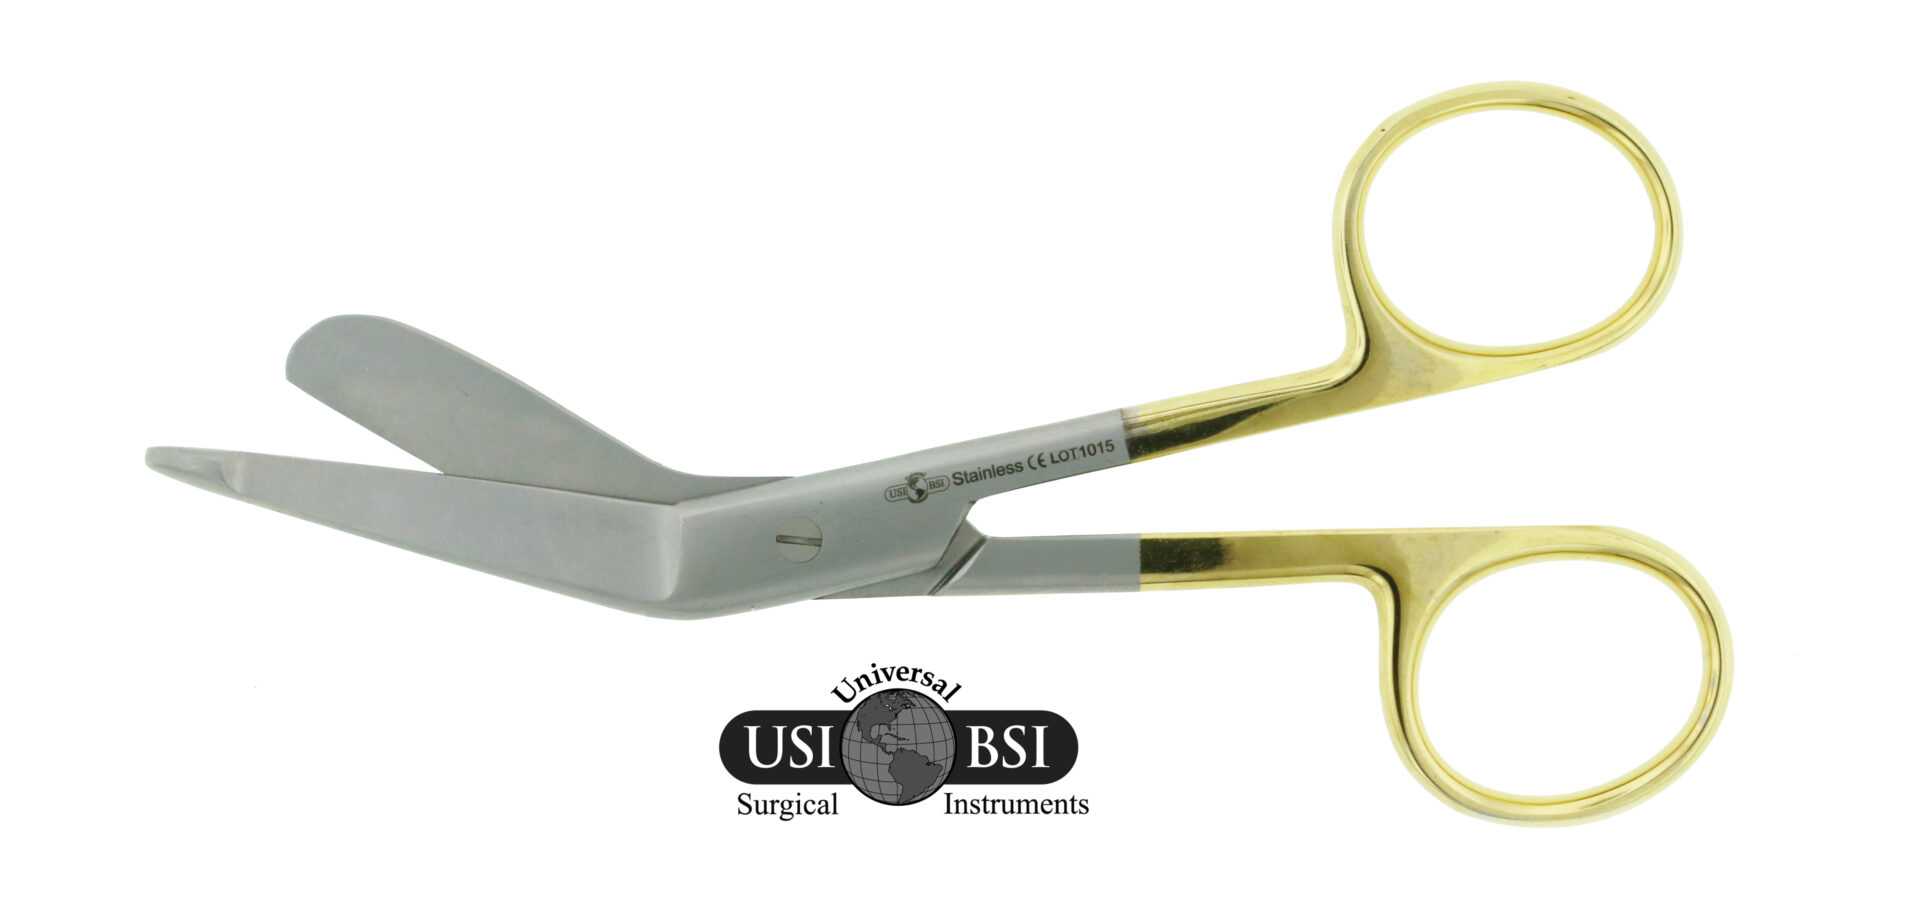 A pair of scissors with the us bsi logo on one side and surgical instruments on the other.